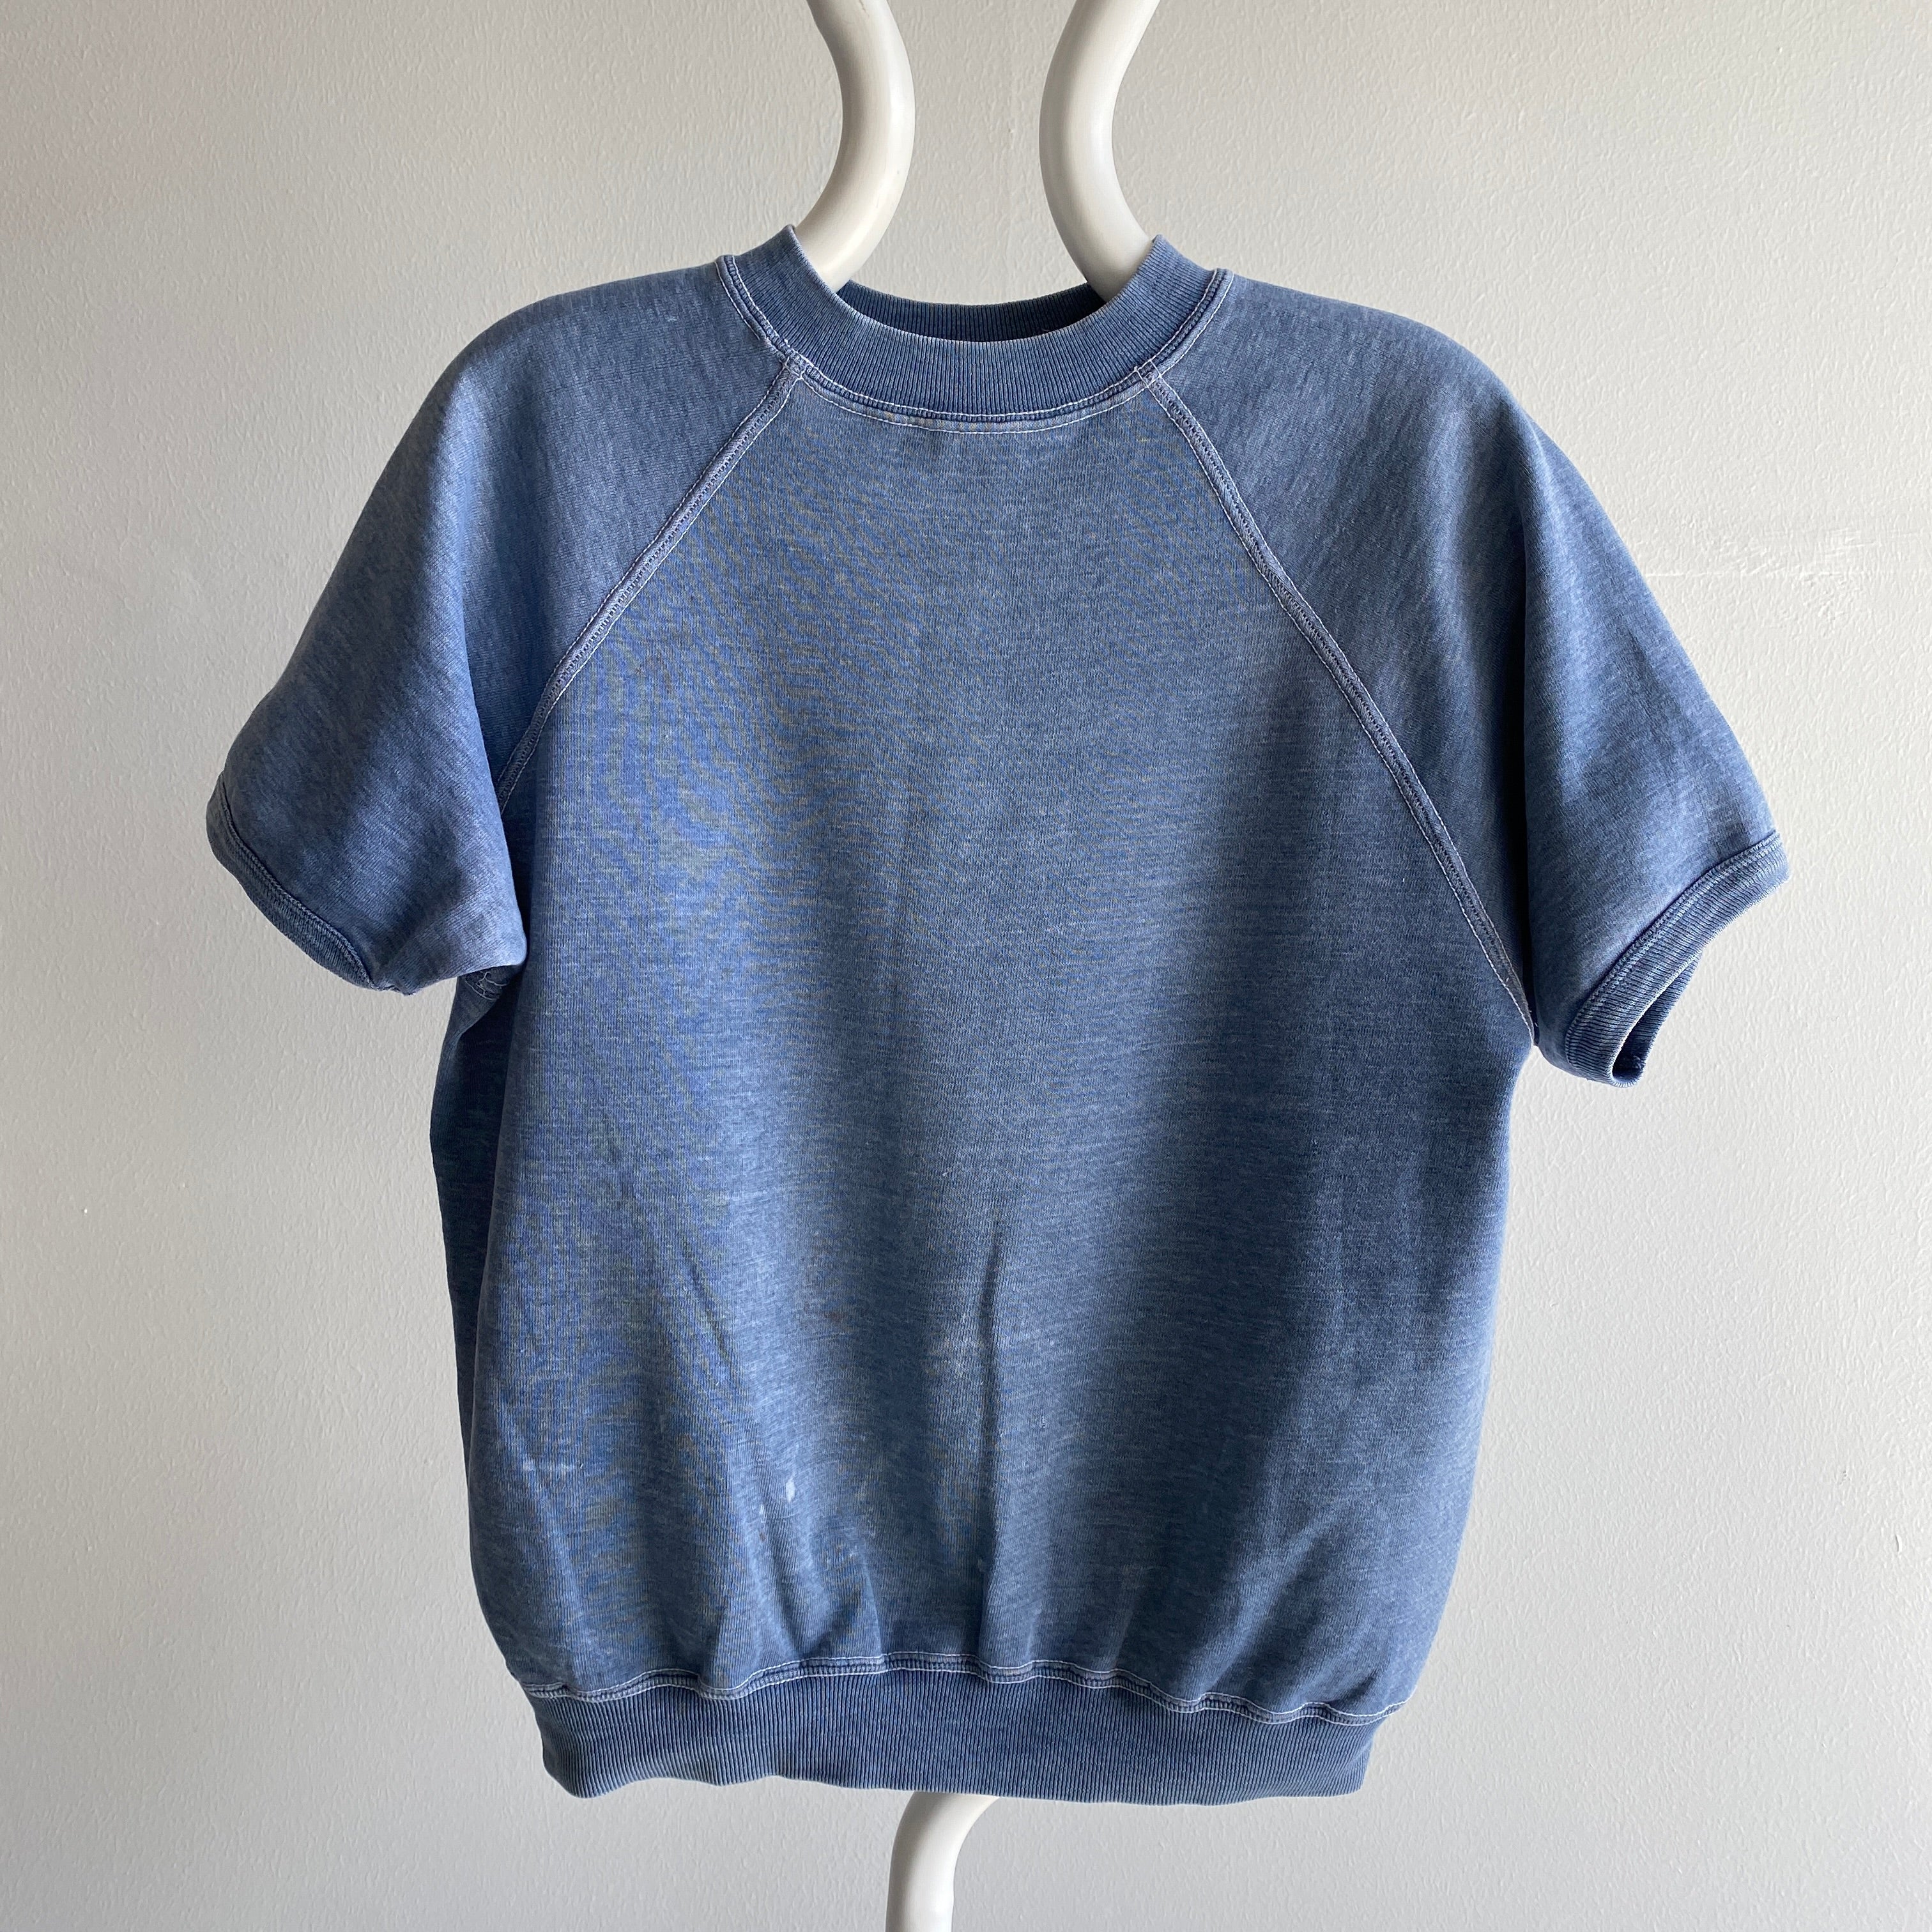 1970s Ultra Faded Blue/Gray Bleach and Other Stained Warm Up - RAD!